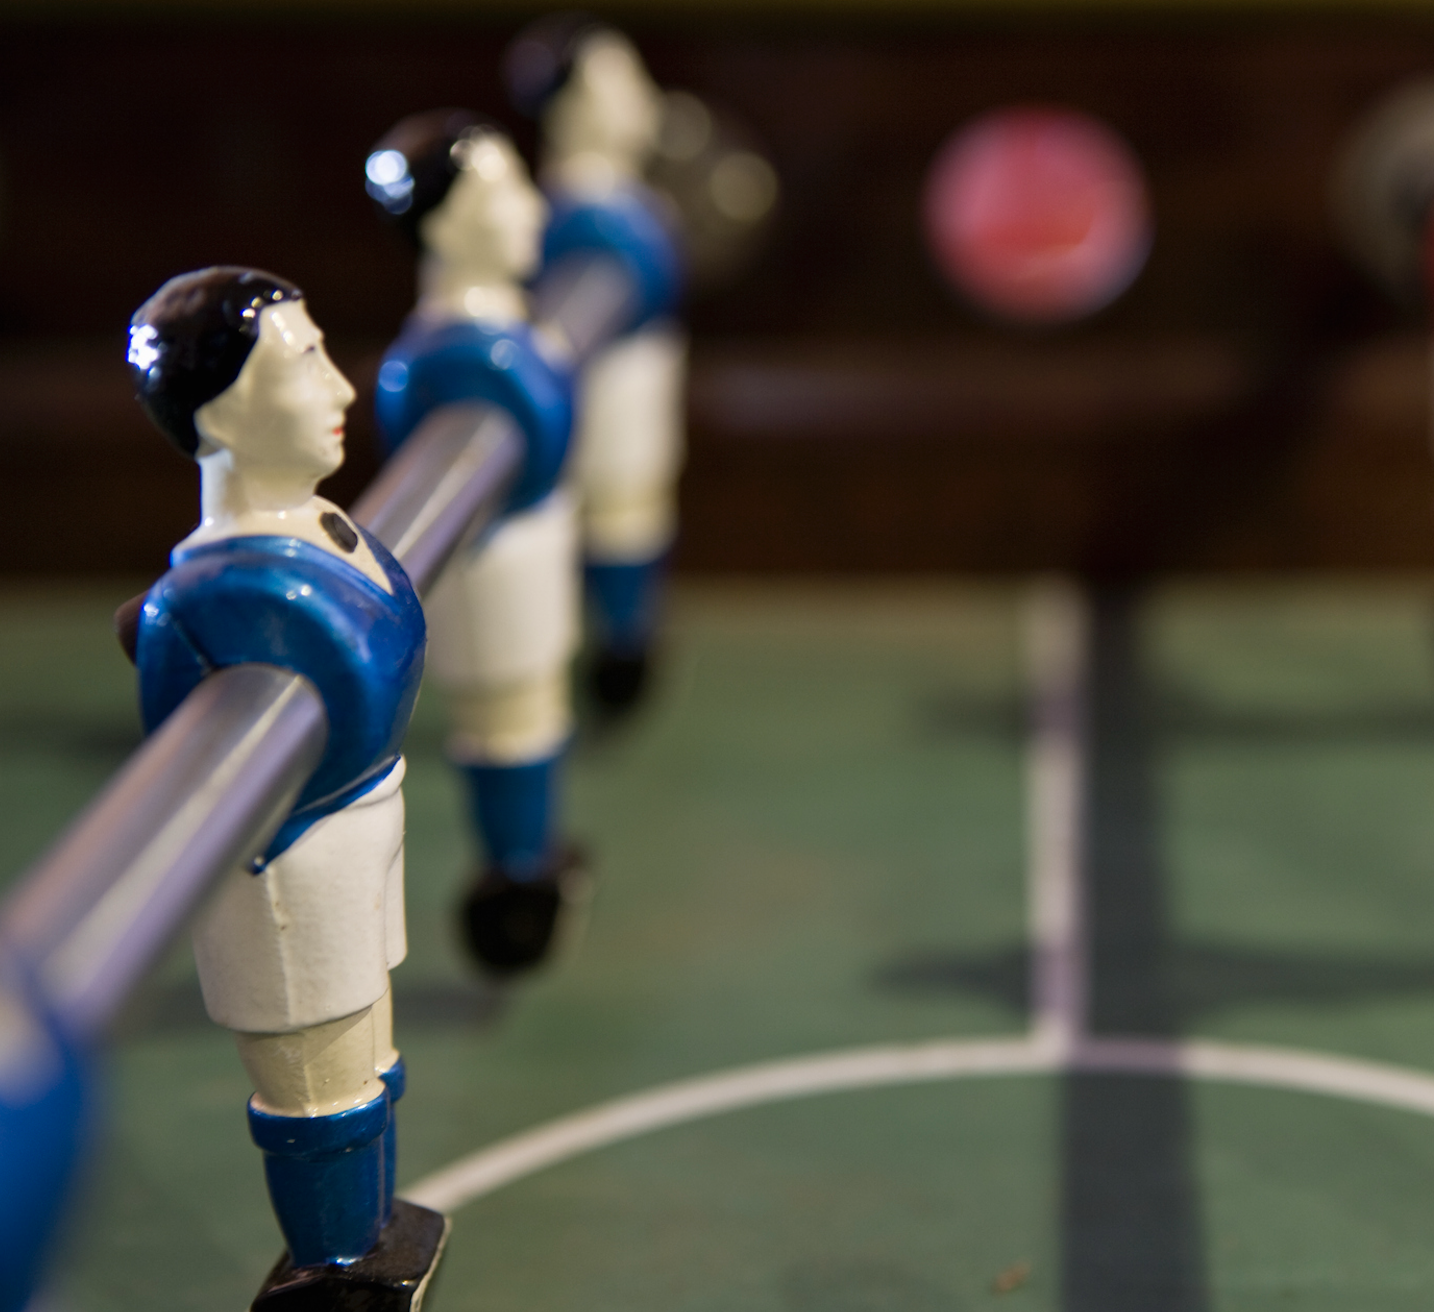 Closeup image of a foosball table, with plastic figures on a metal rod wearing blue jerseys.